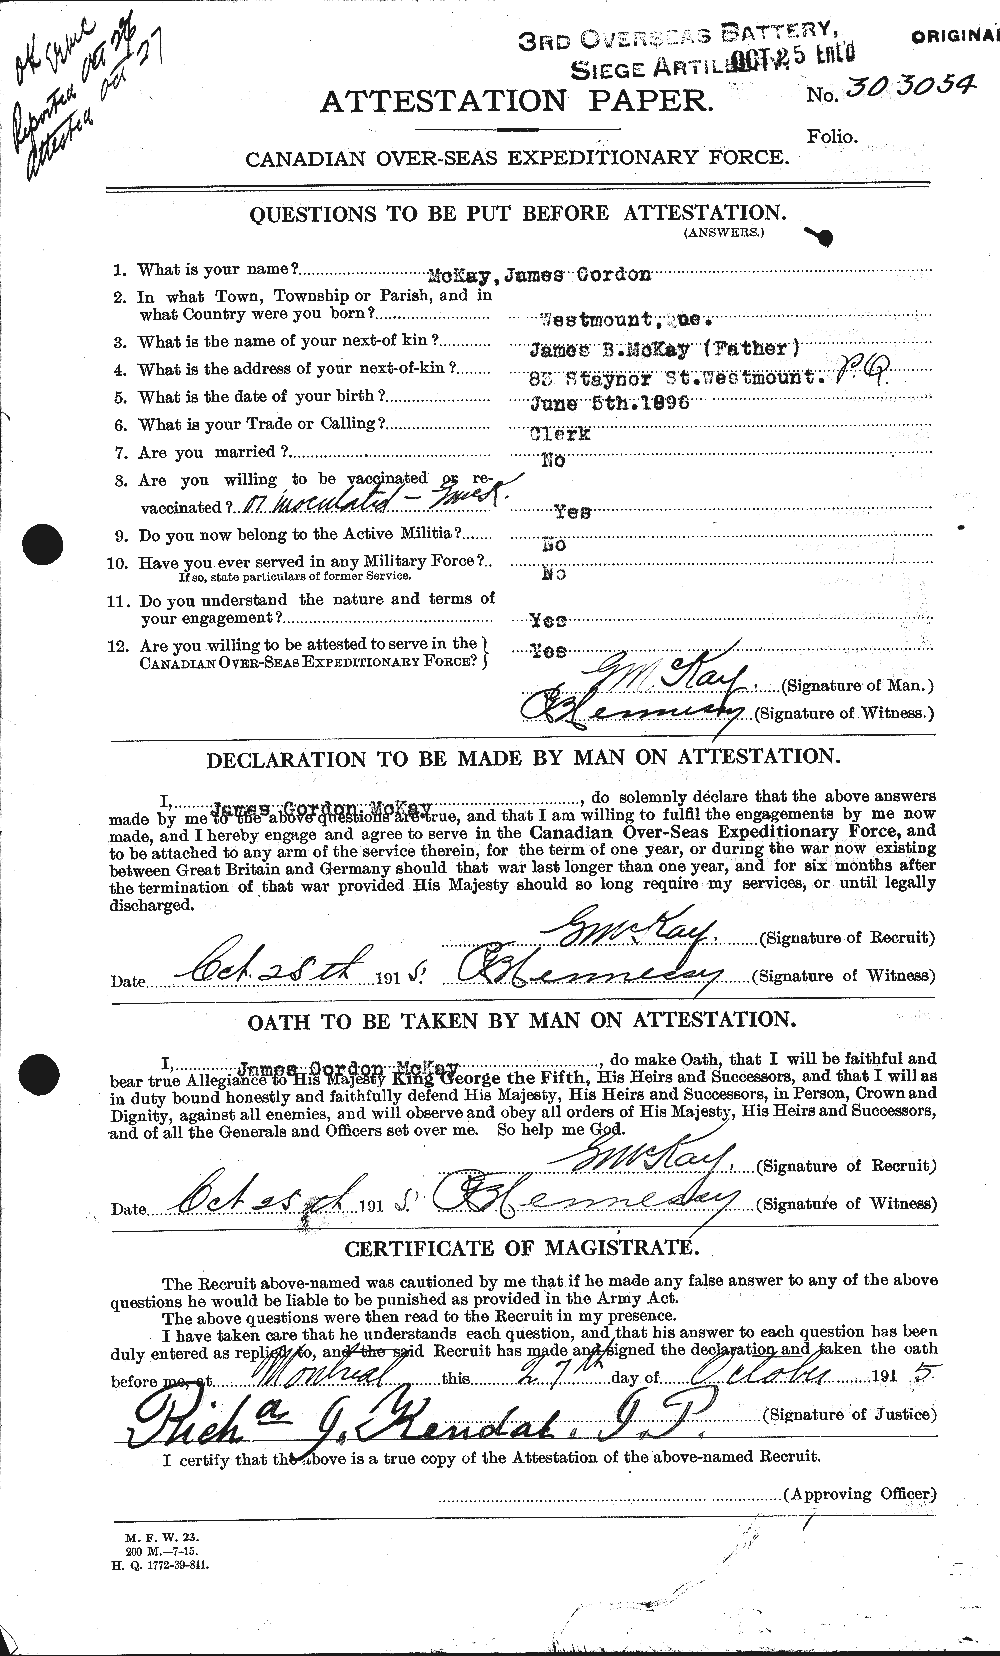 Personnel Records of the First World War - CEF 534836a